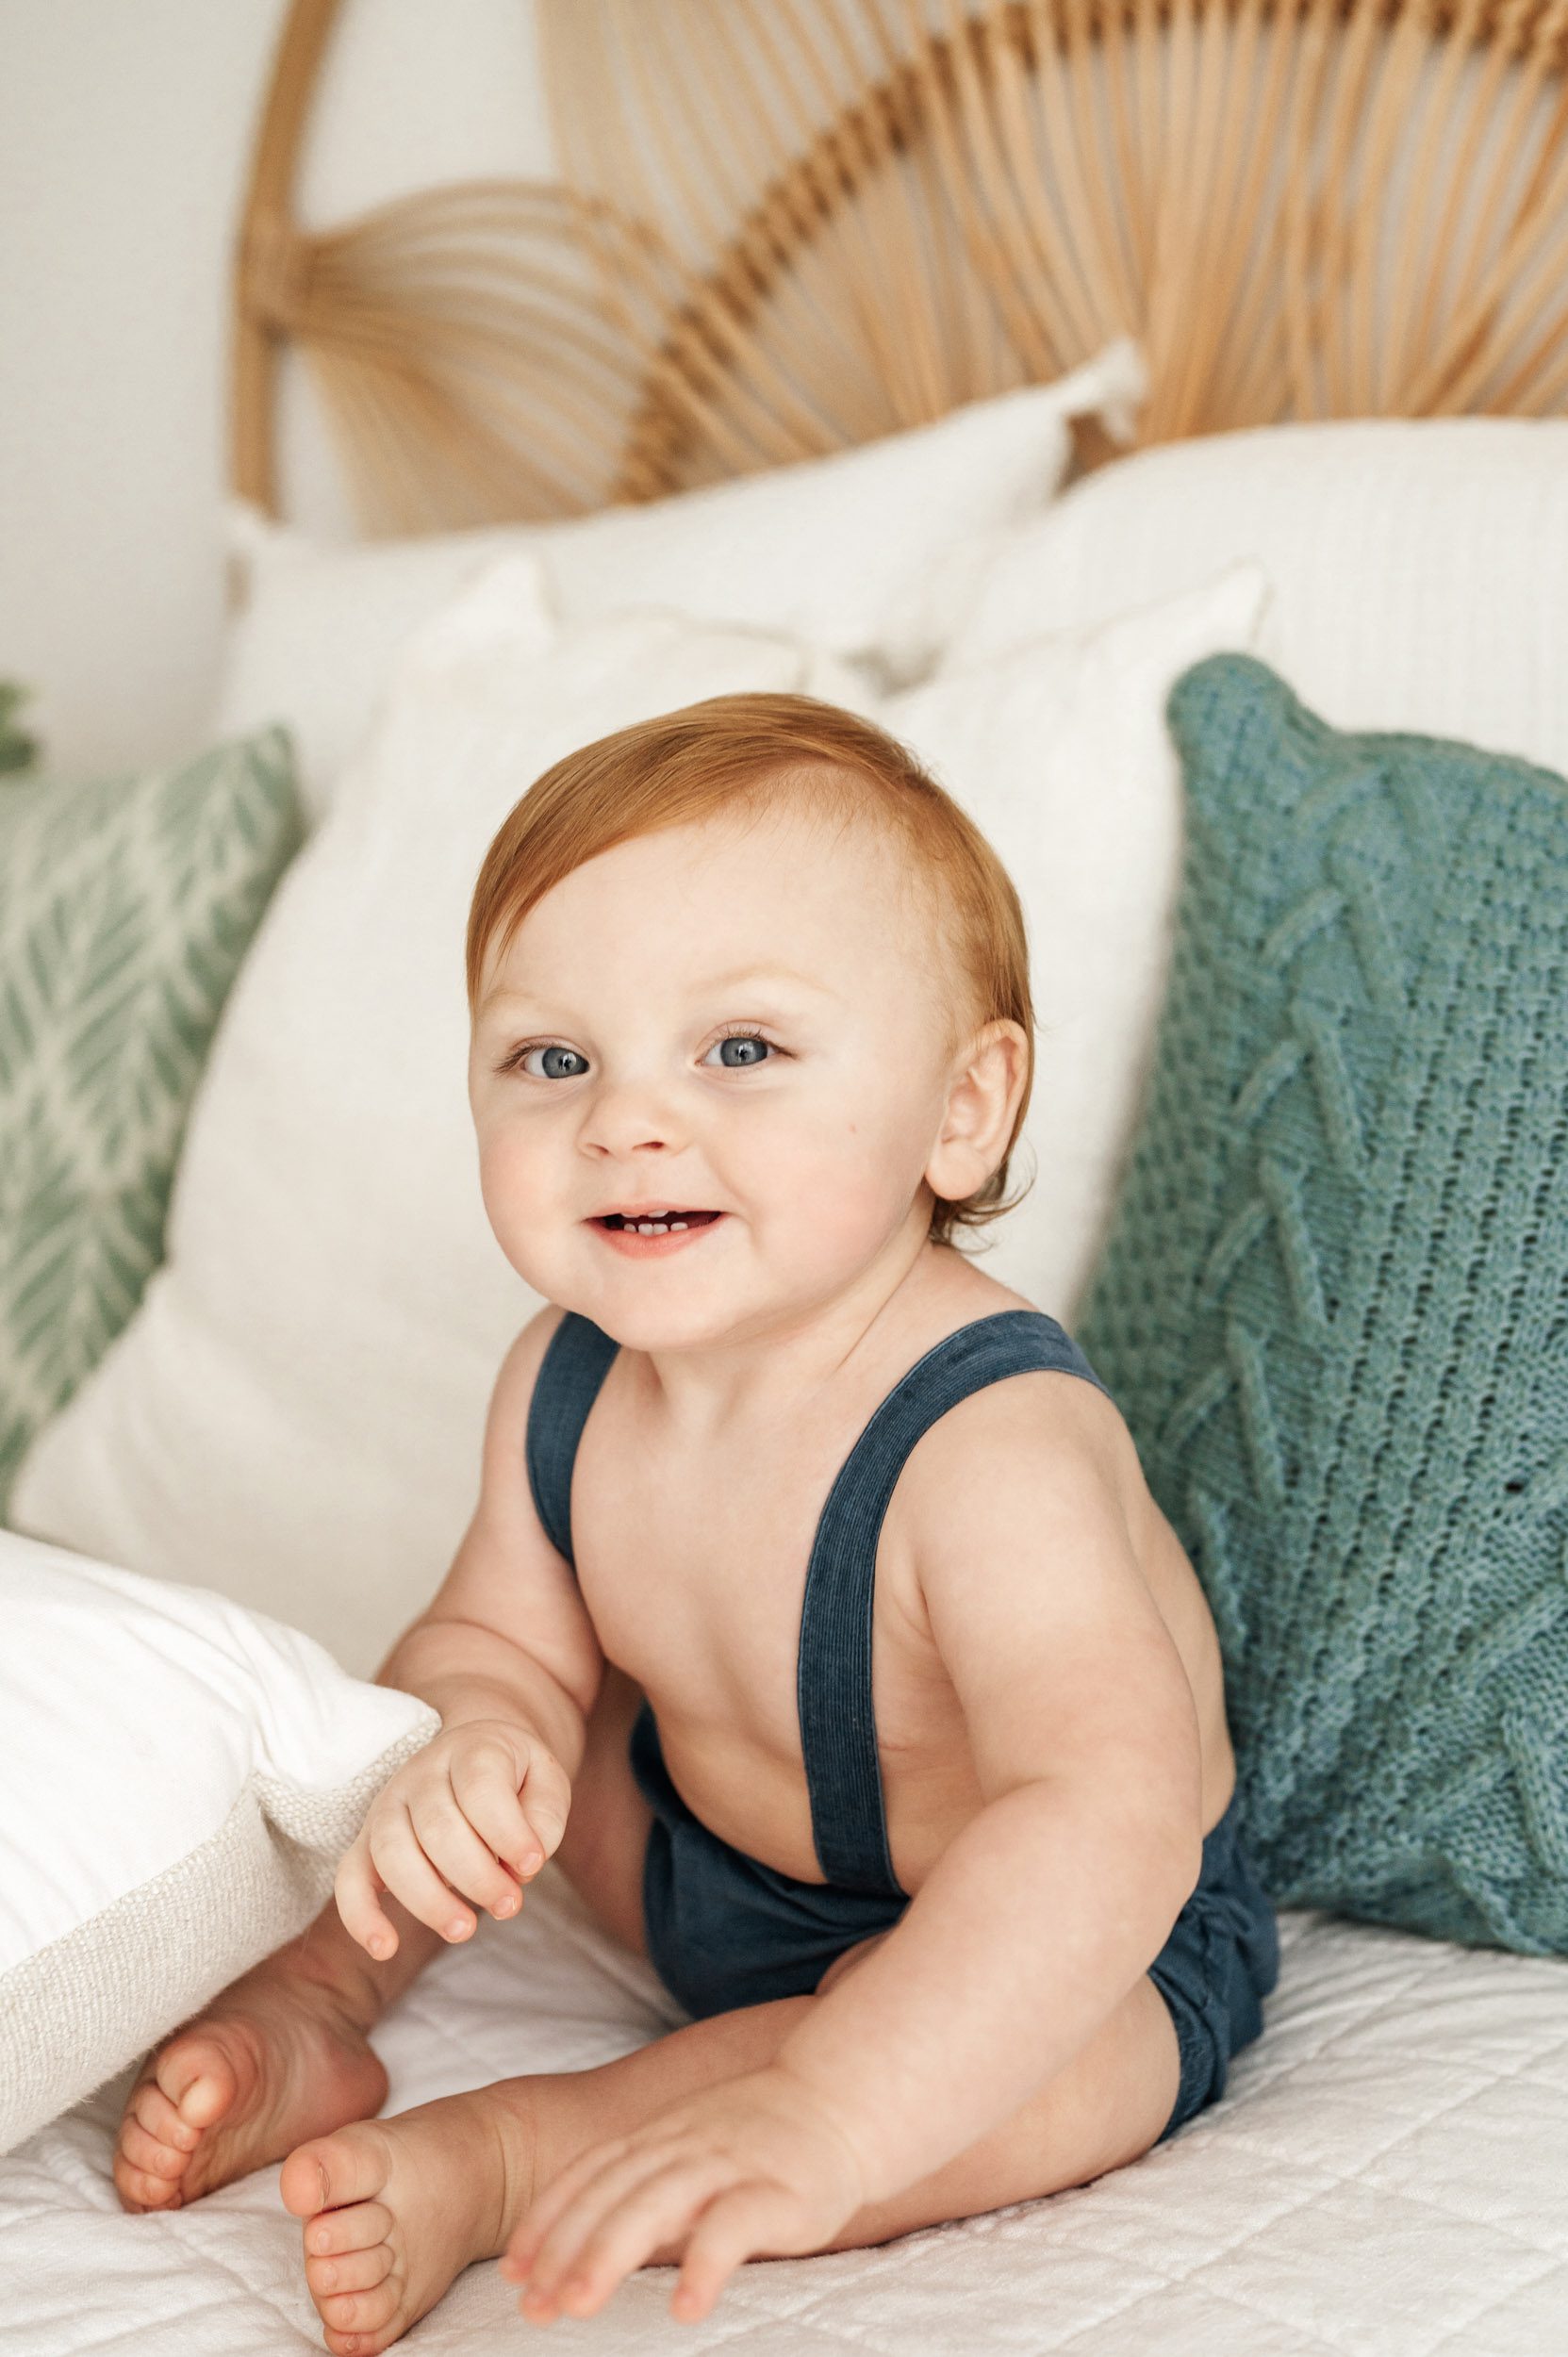 a young boy wearing blue shorts with suspenders sitting on a bed and smiling at the camera during a milestone photo session